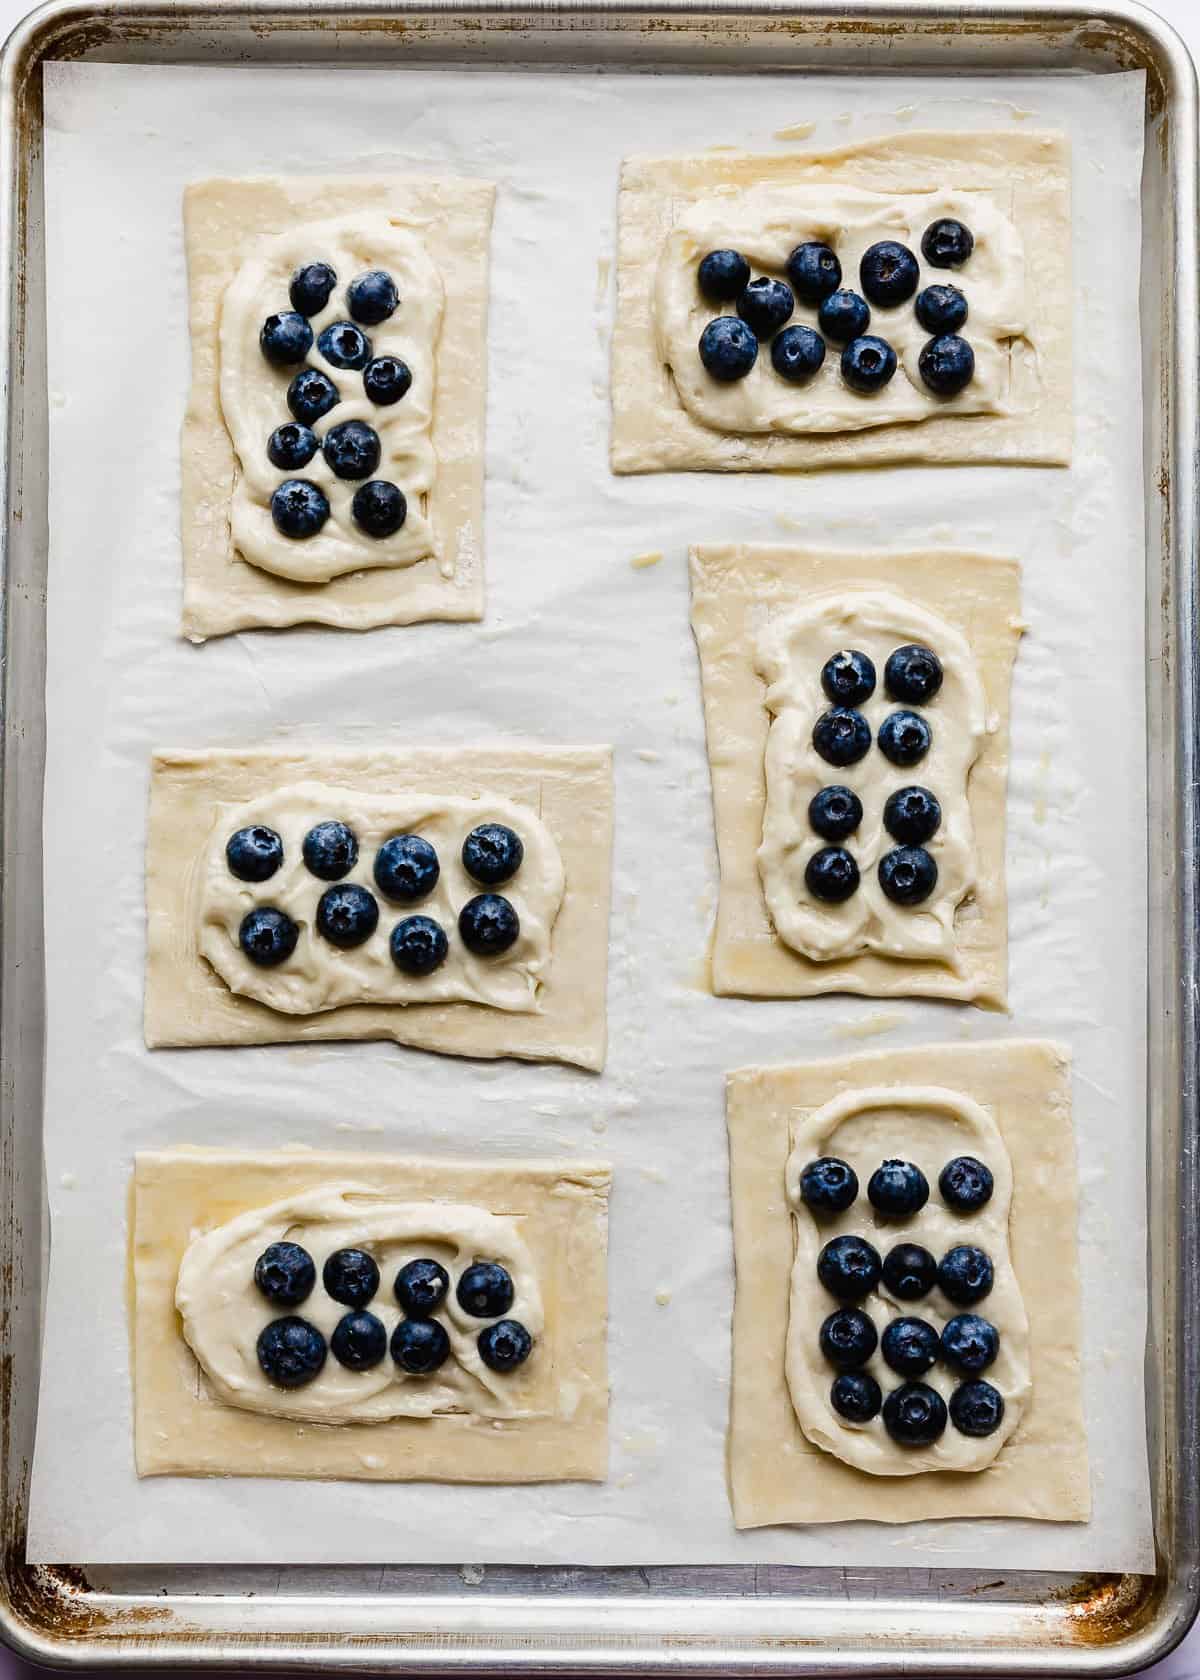 Fresh blueberries on top of a cream cheese mixture on raw puff pastry squares.